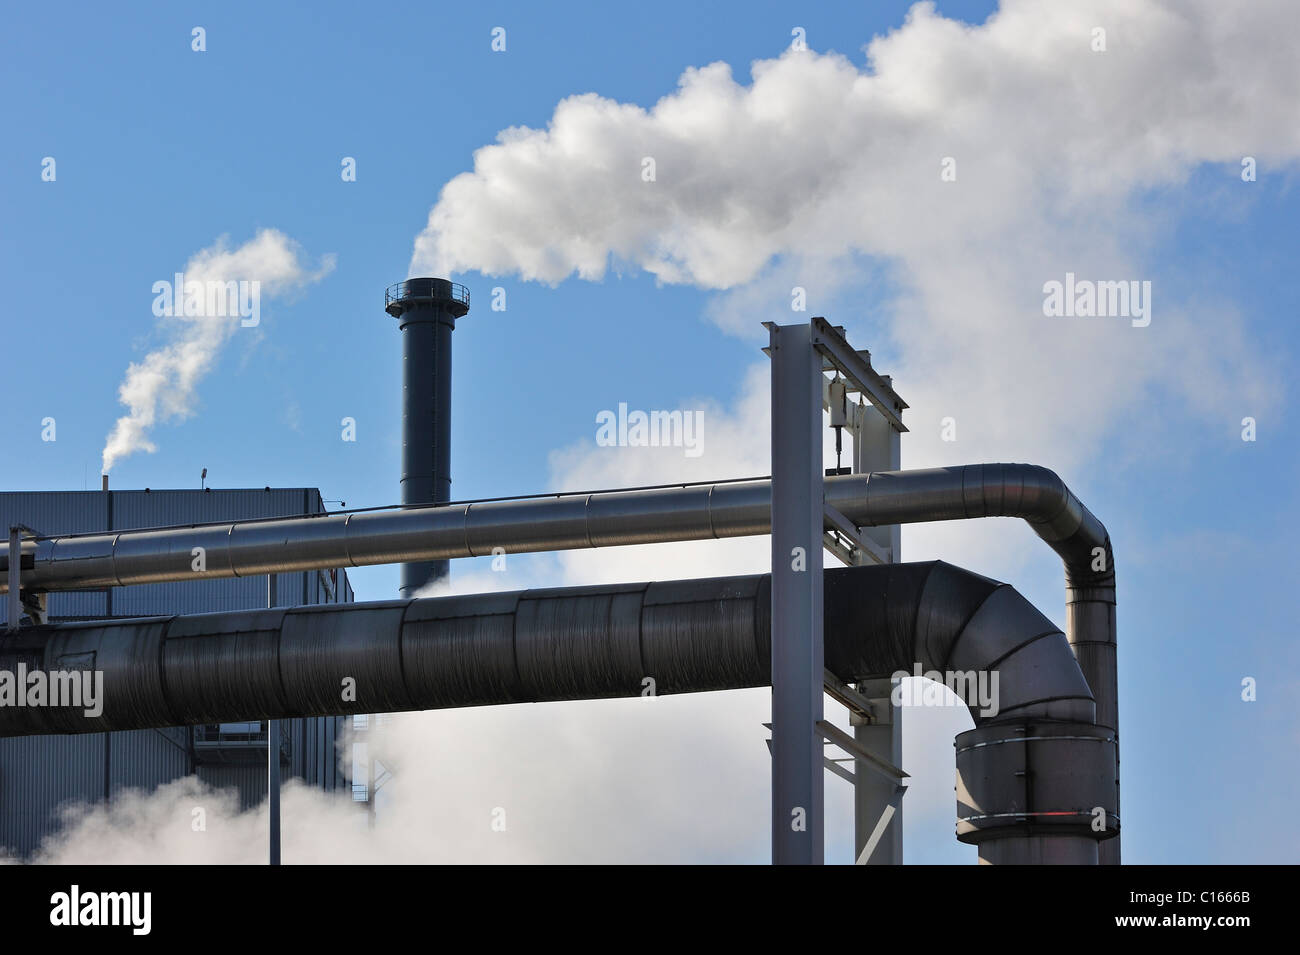 Air pollution from smoke from industrial chimney, Belgium Stock Photo